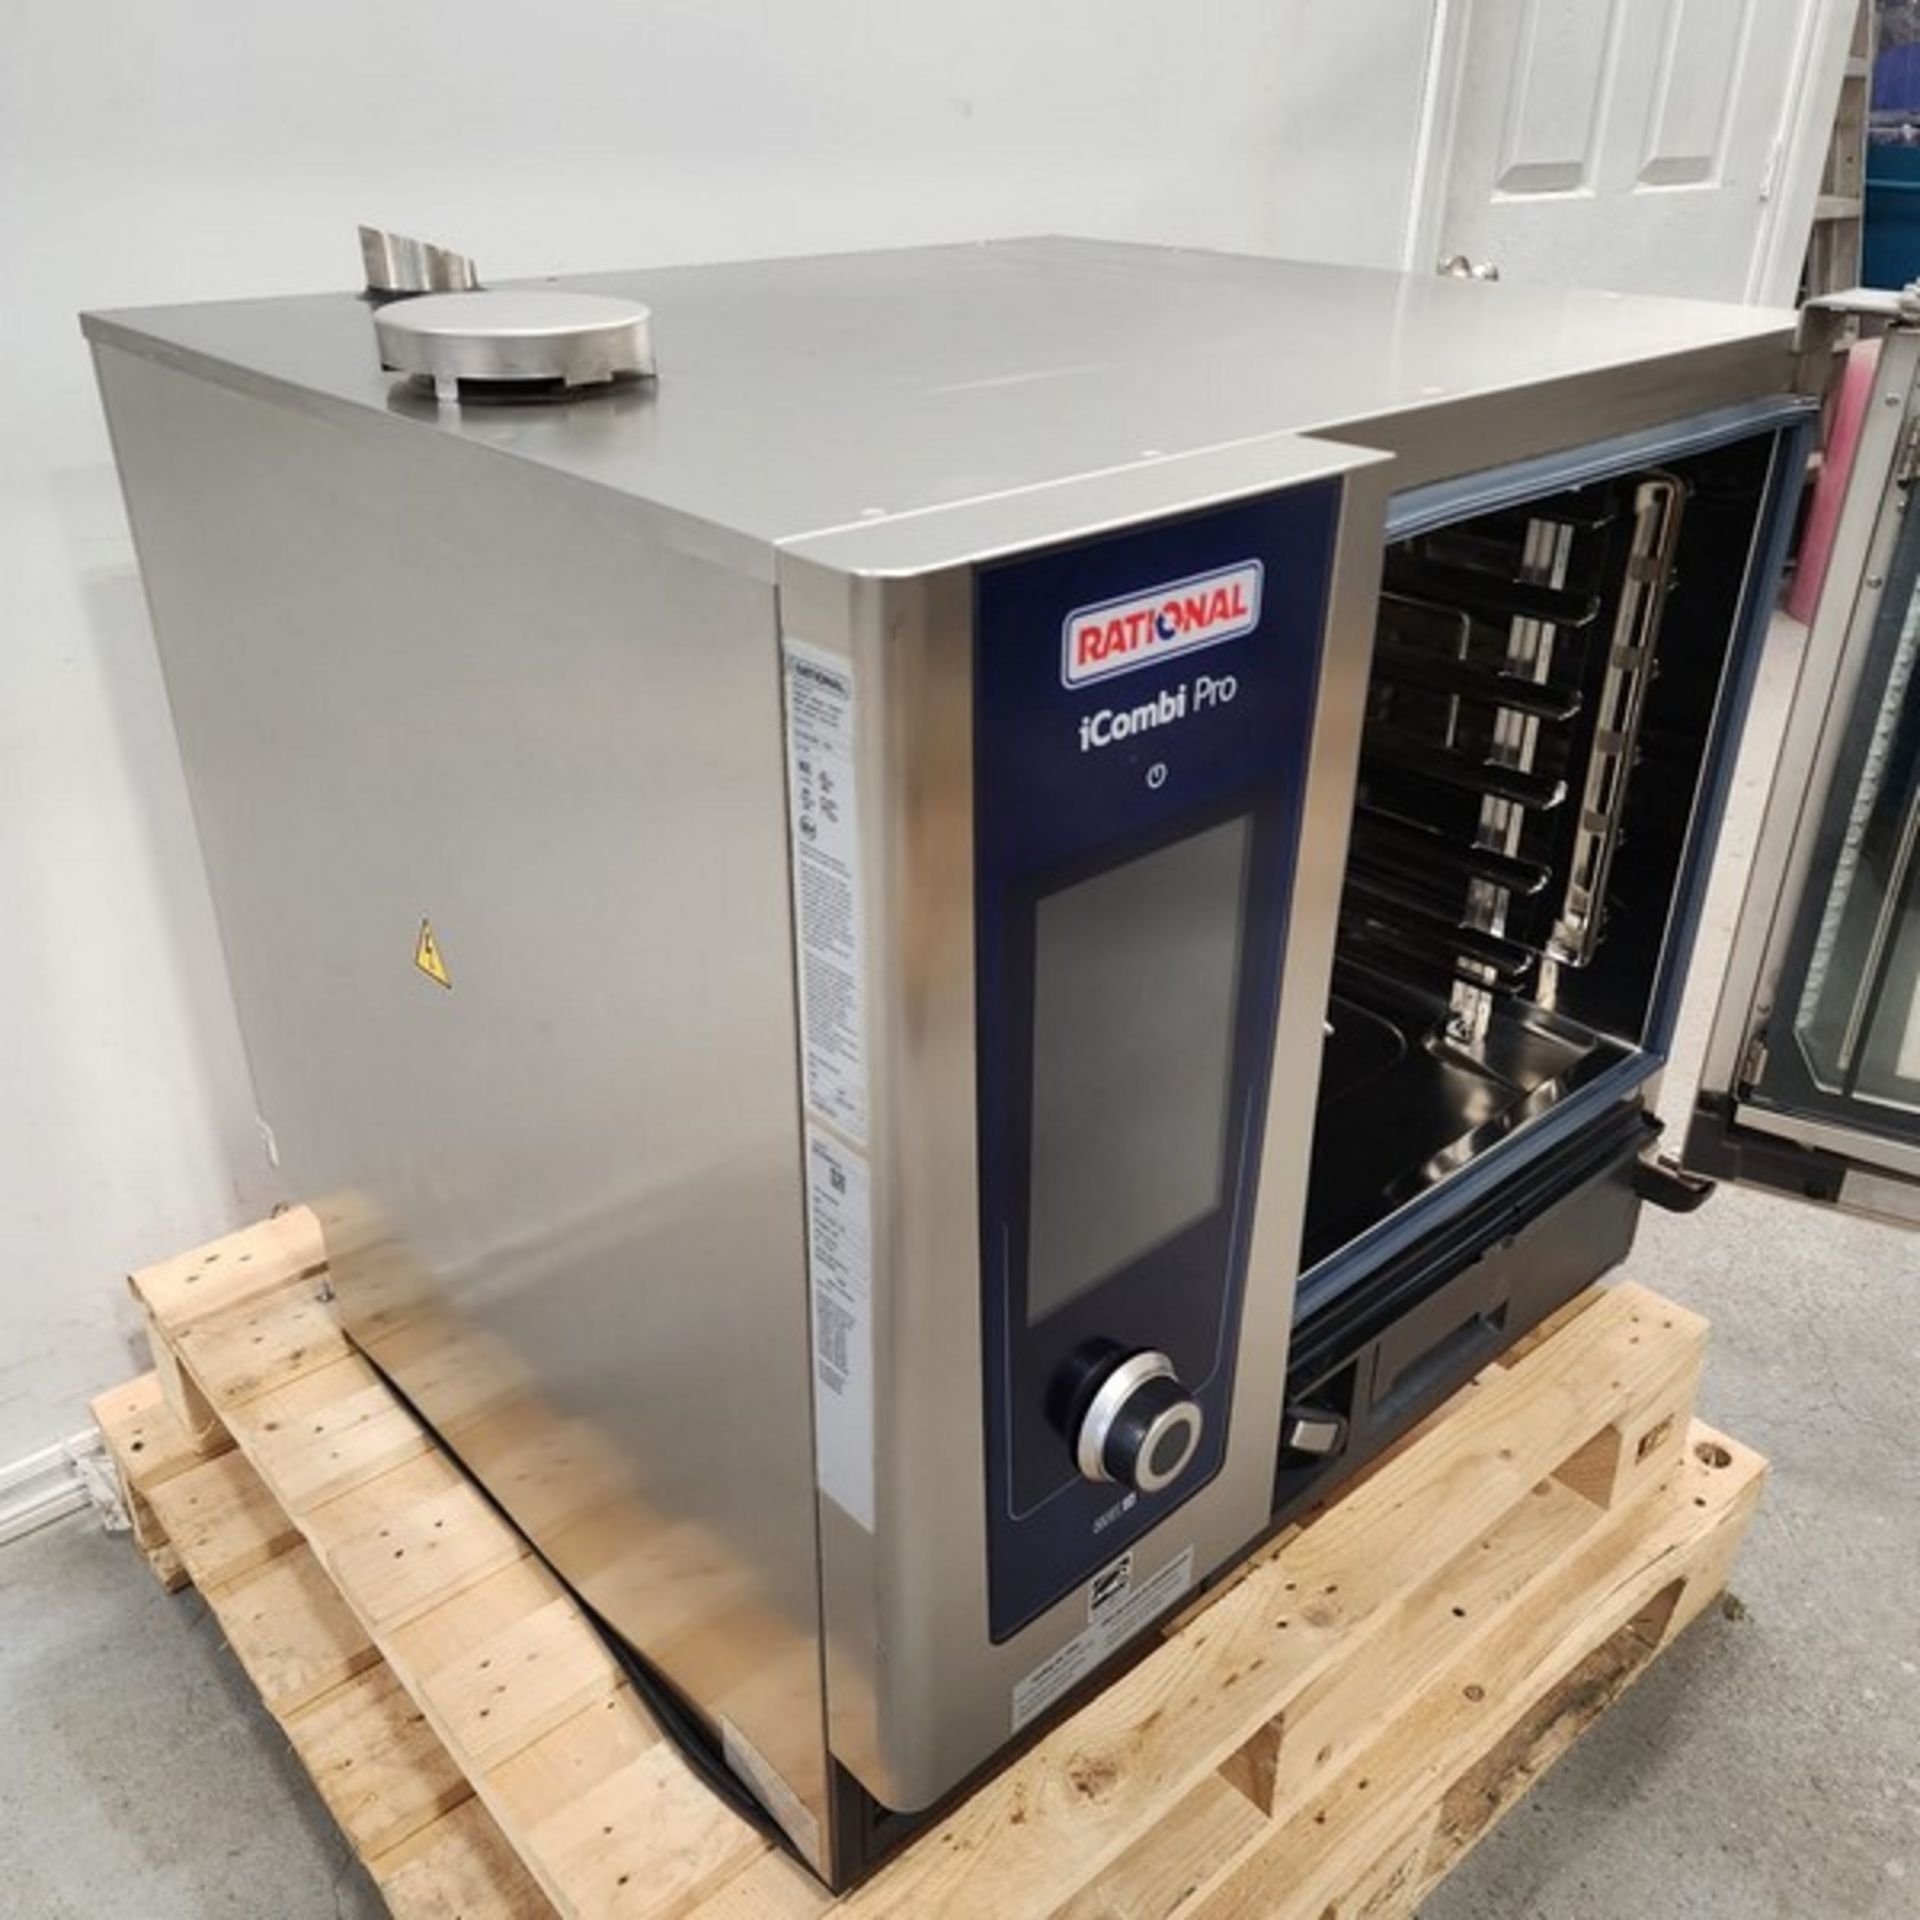 RATIONAL COMBI OVEN **BRAND NEW CONDITION** AG Model ICOMBI PRO Never been plugged in 440/480 volts - Image 3 of 7